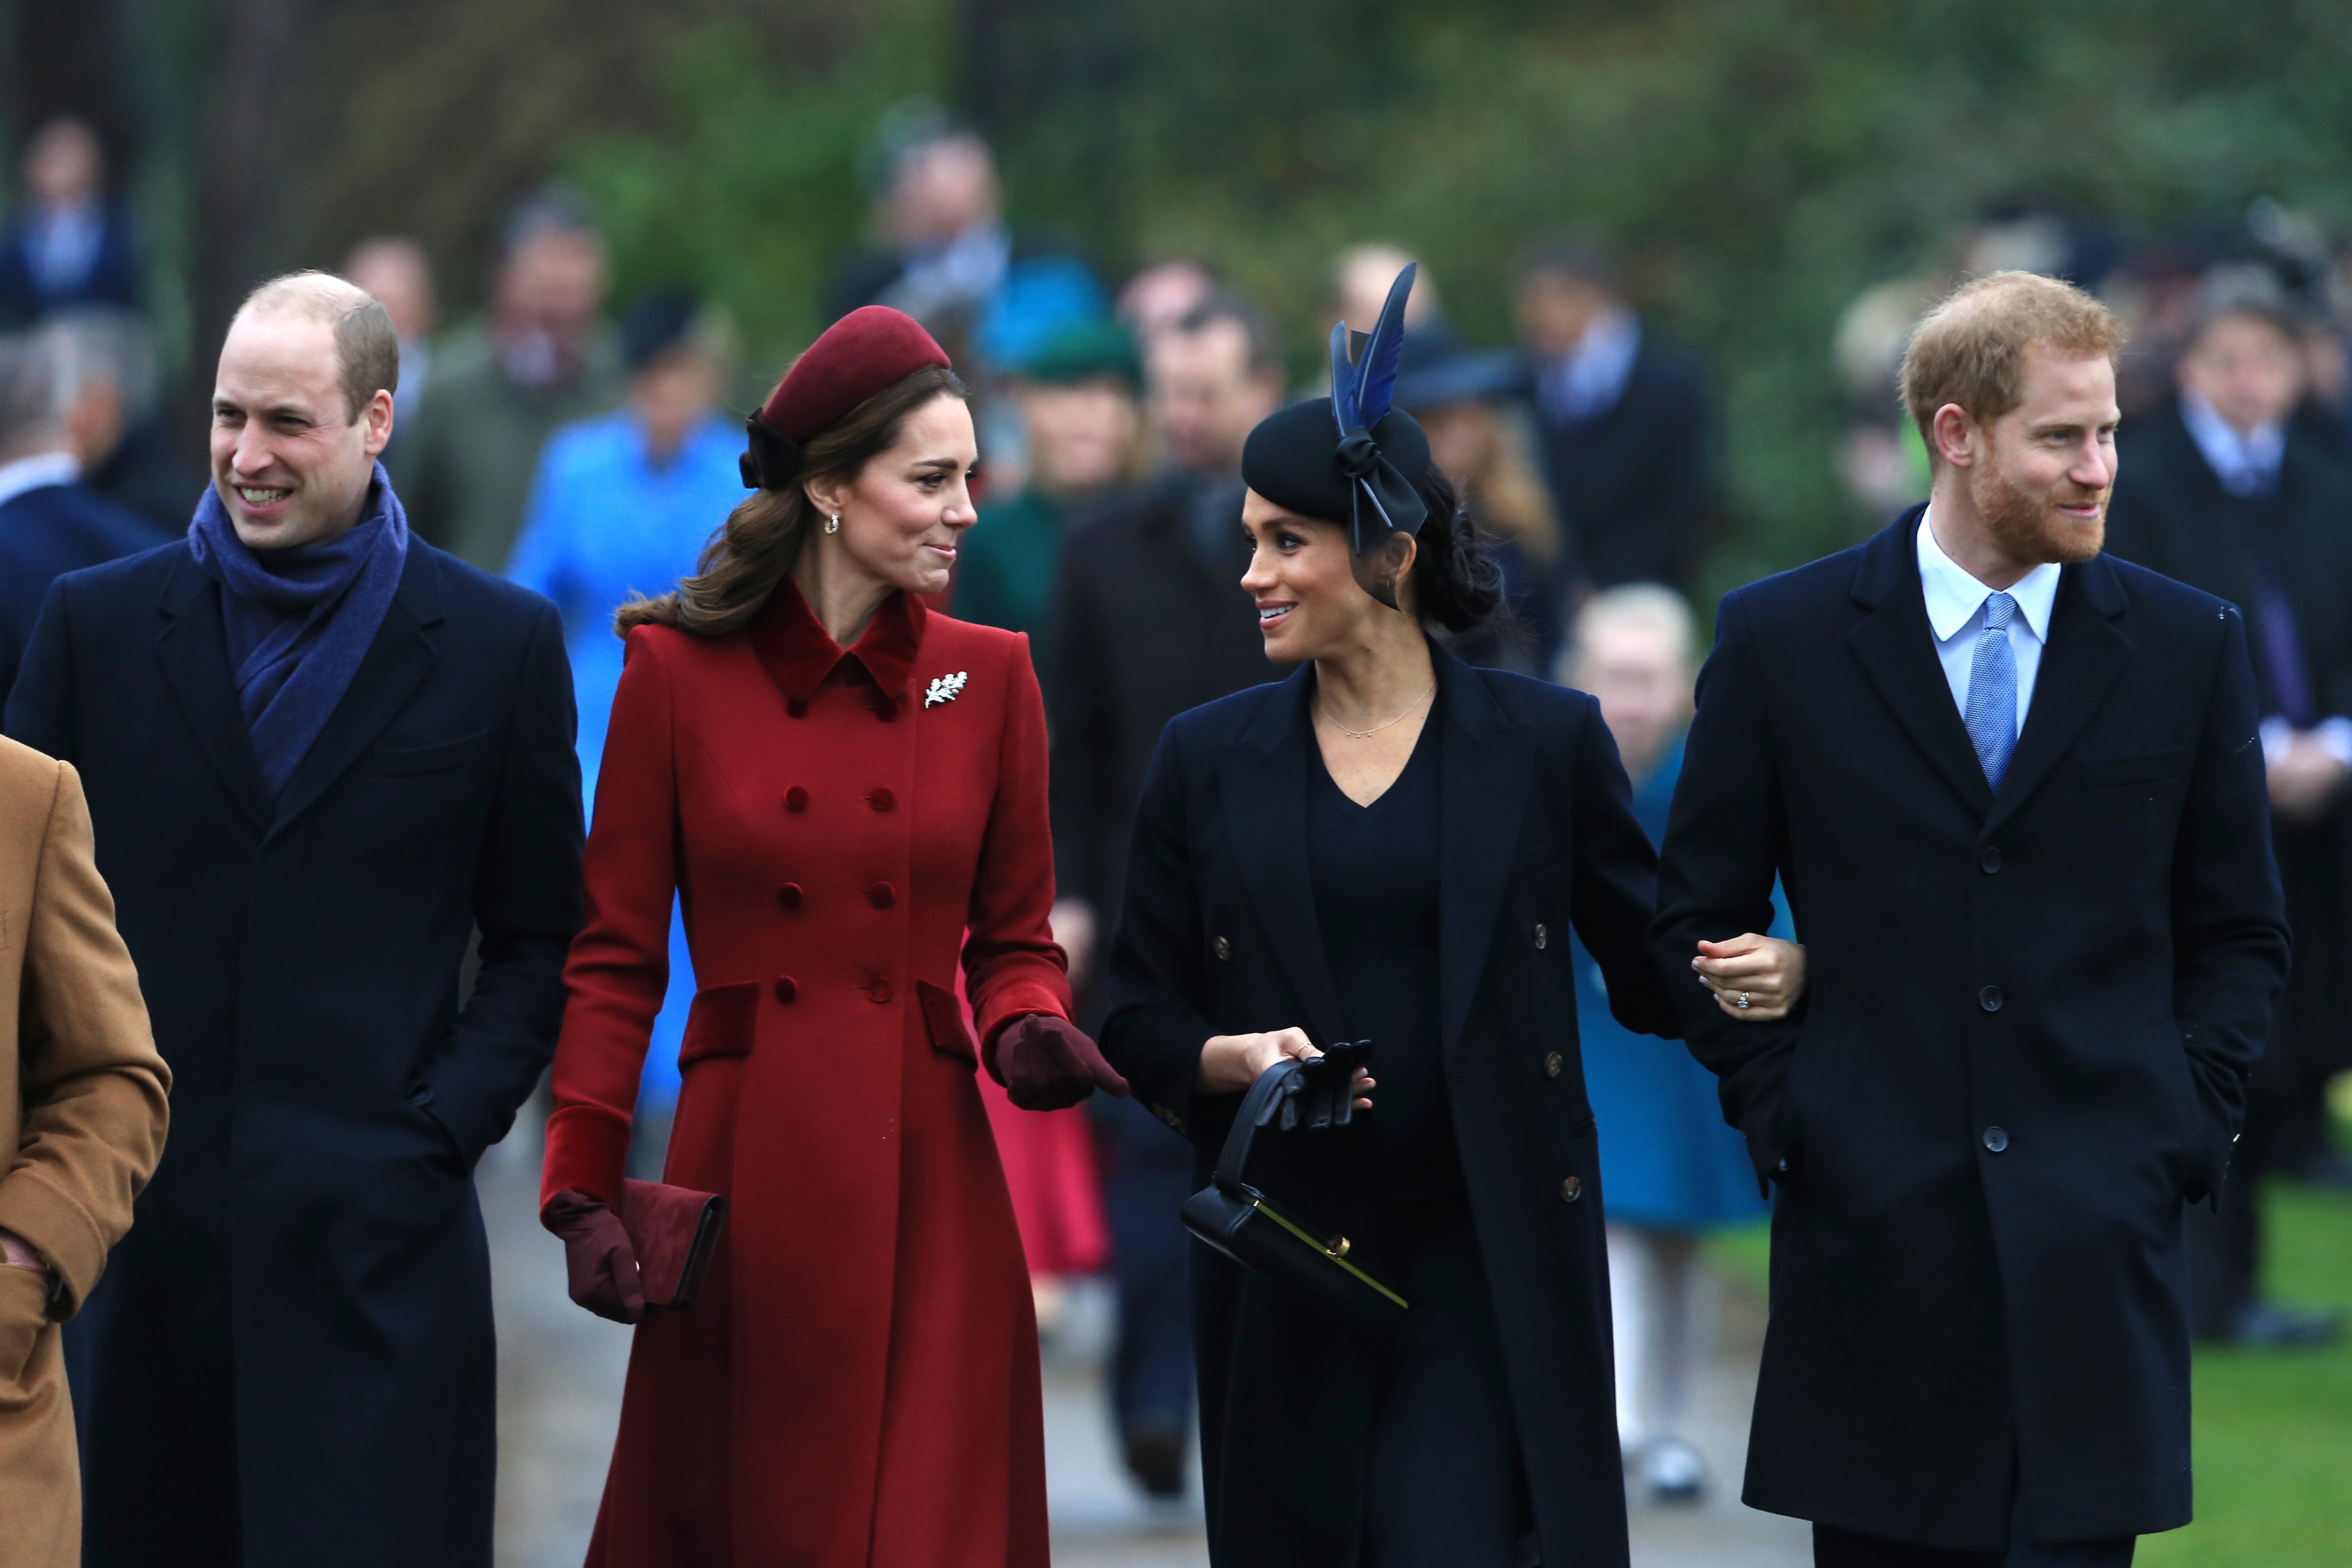 Prince William, Kate Middleton, Meghan Markle, and Prince Harry pictured arriving to attend Christmas Day Church service at Church of St Mary Magdalene on the Sandringham estate on December 25, 2018 in King's Lynn, England. | Source: Getty Images